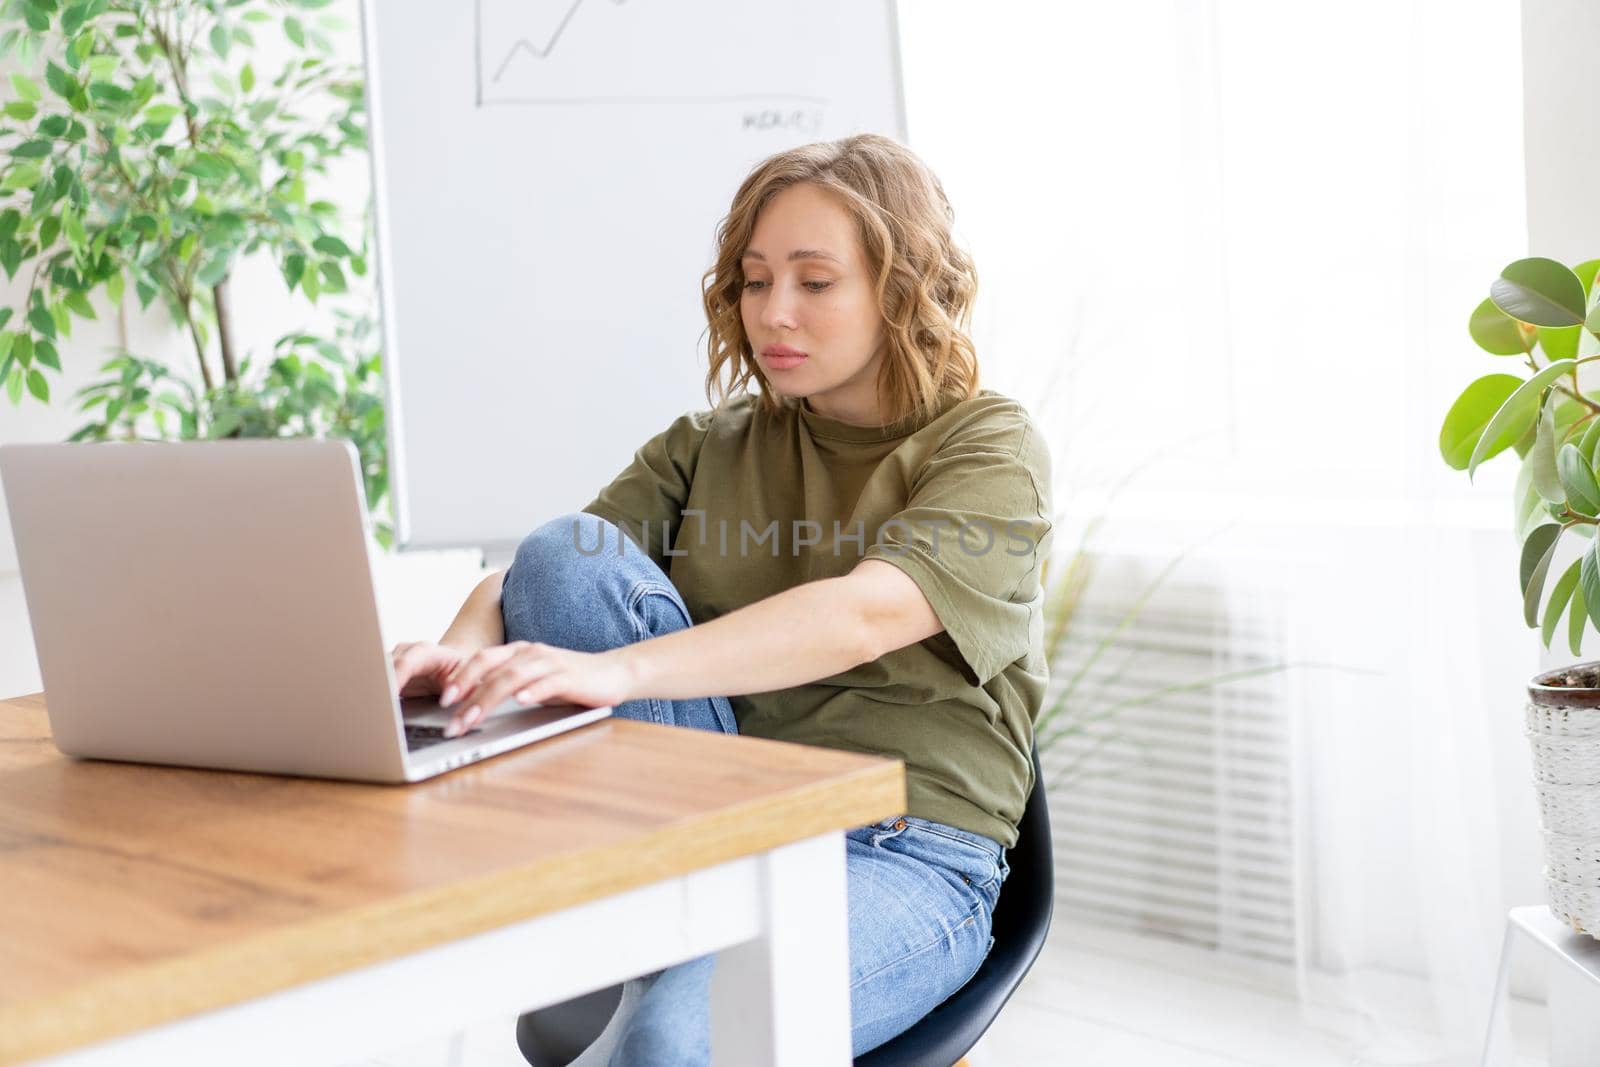 Business woman using laptop sitting desk white office interior with houseplant looking Business people Business person Online, Young and successful Dresed green shirt blue jeans barefoot relaxing